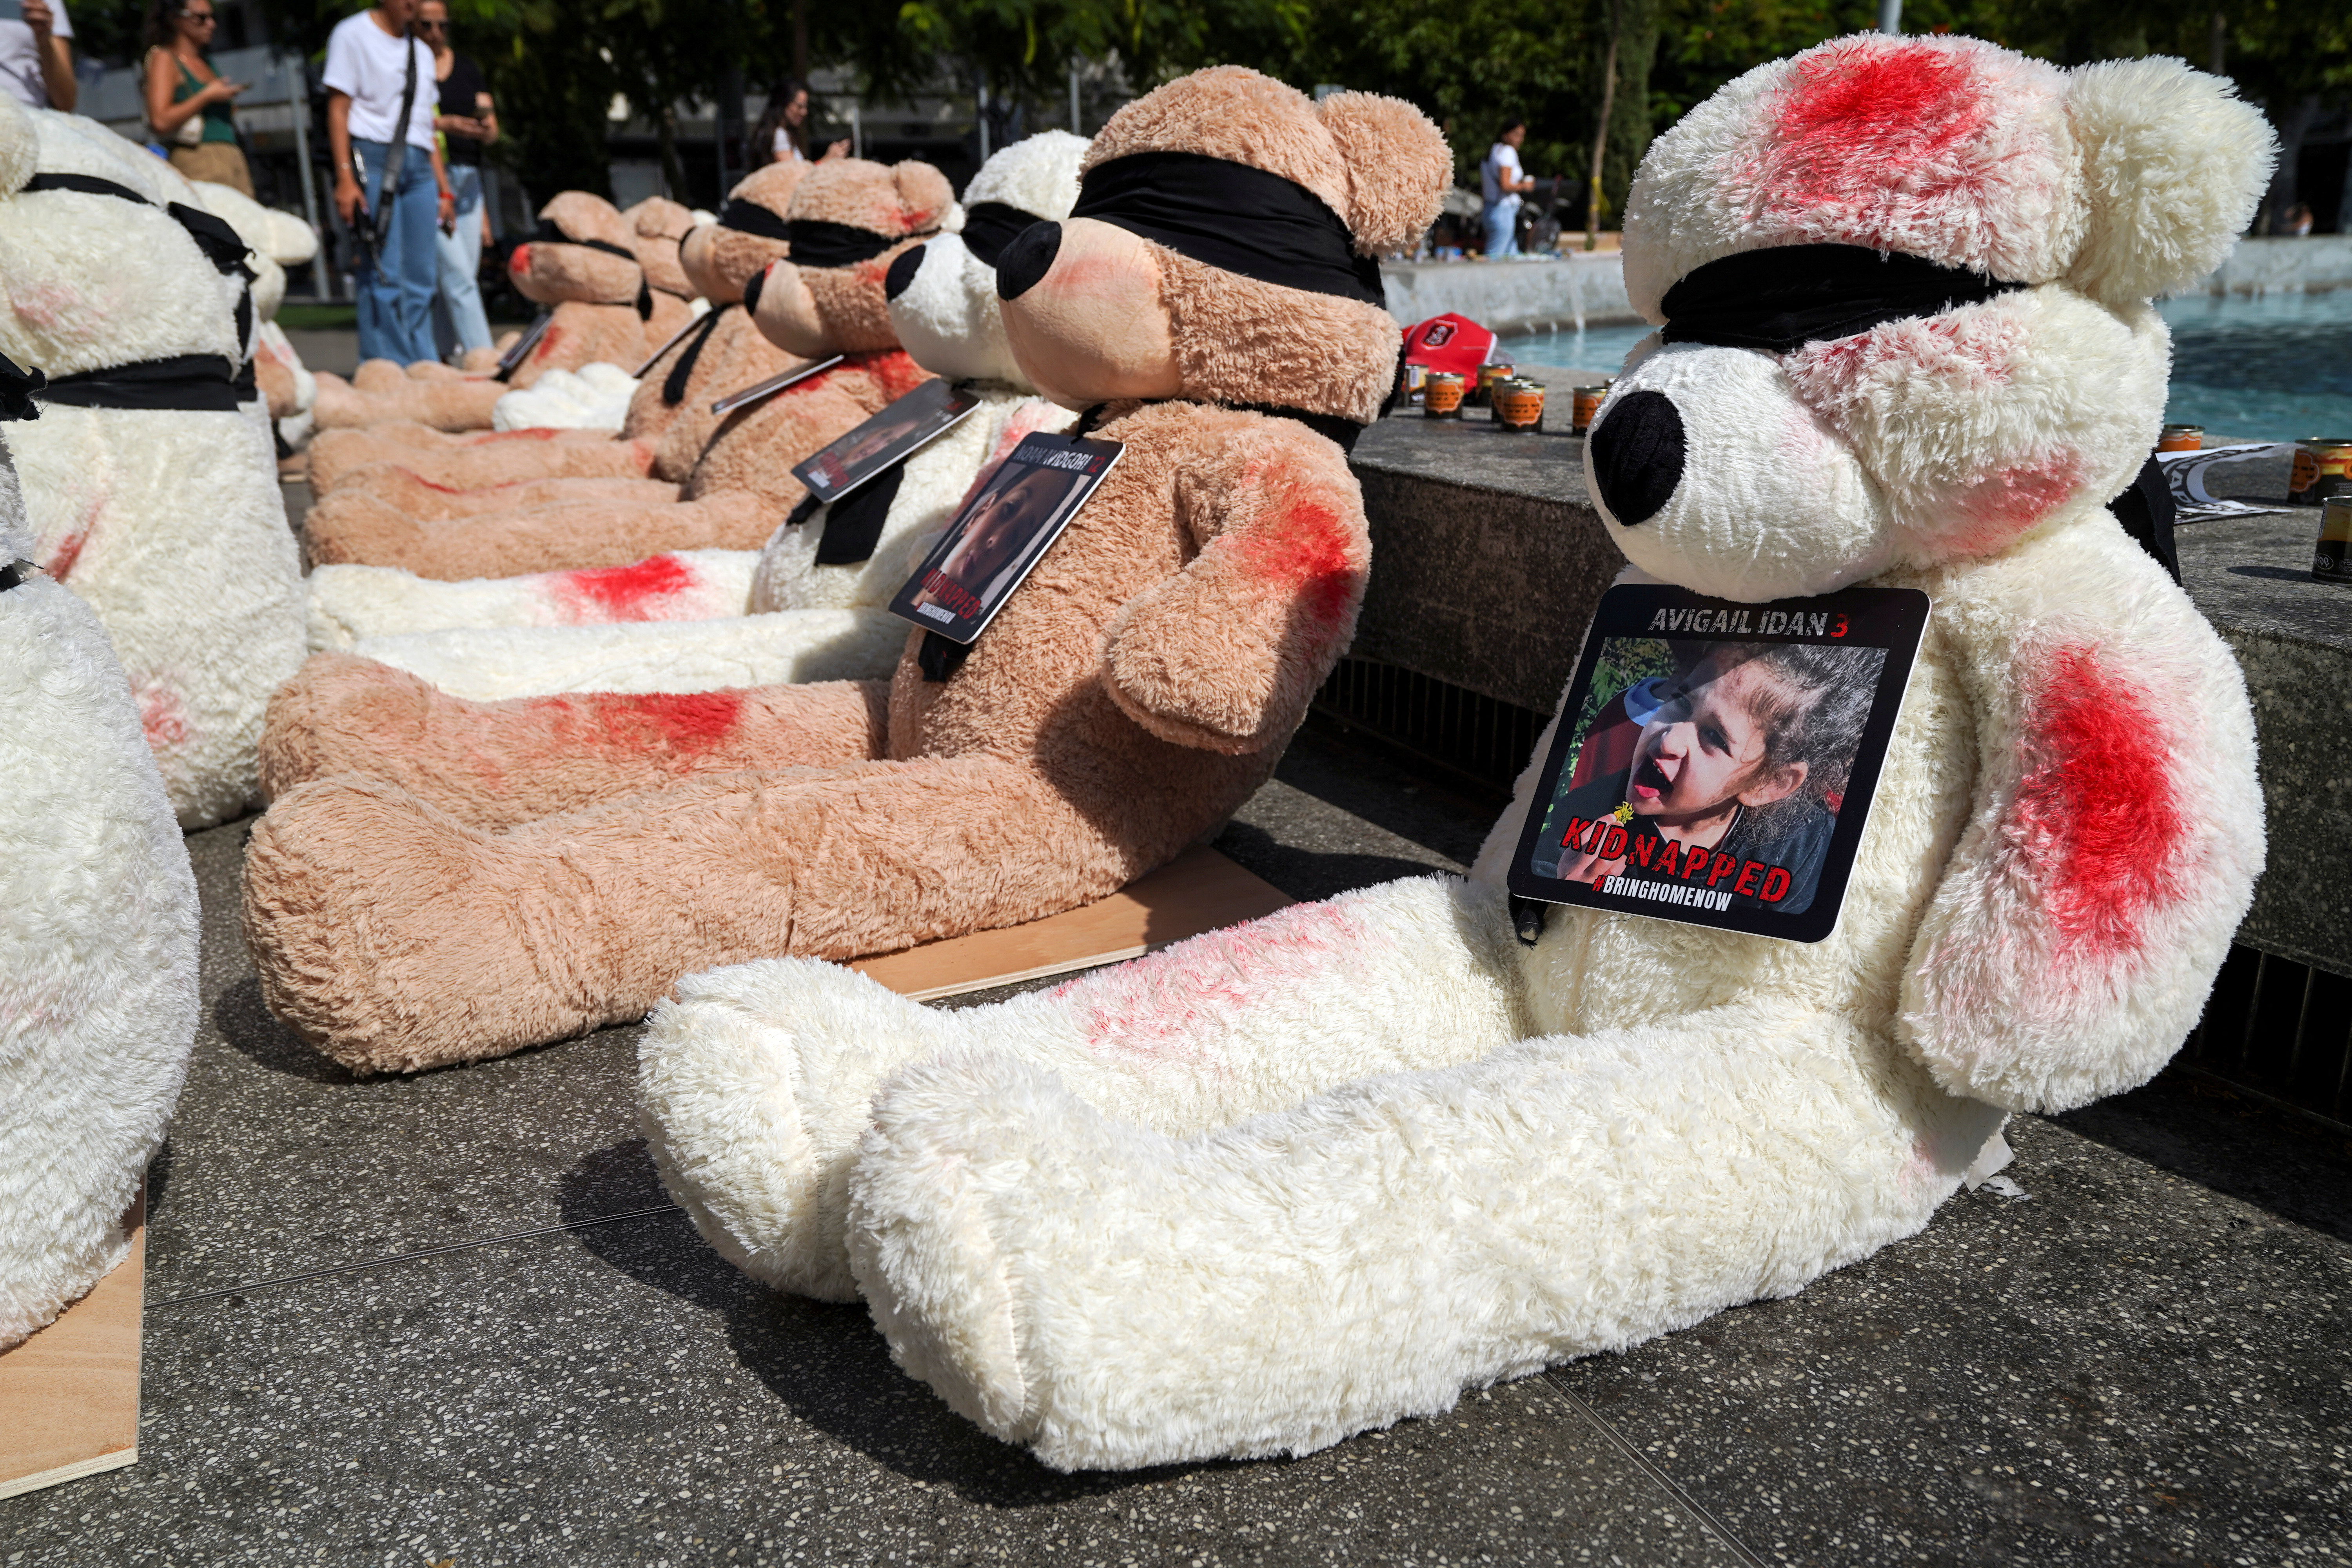 A view shows teddy bears, each representing children who are believed to be held hostage in Gaza, in Tel Aviv